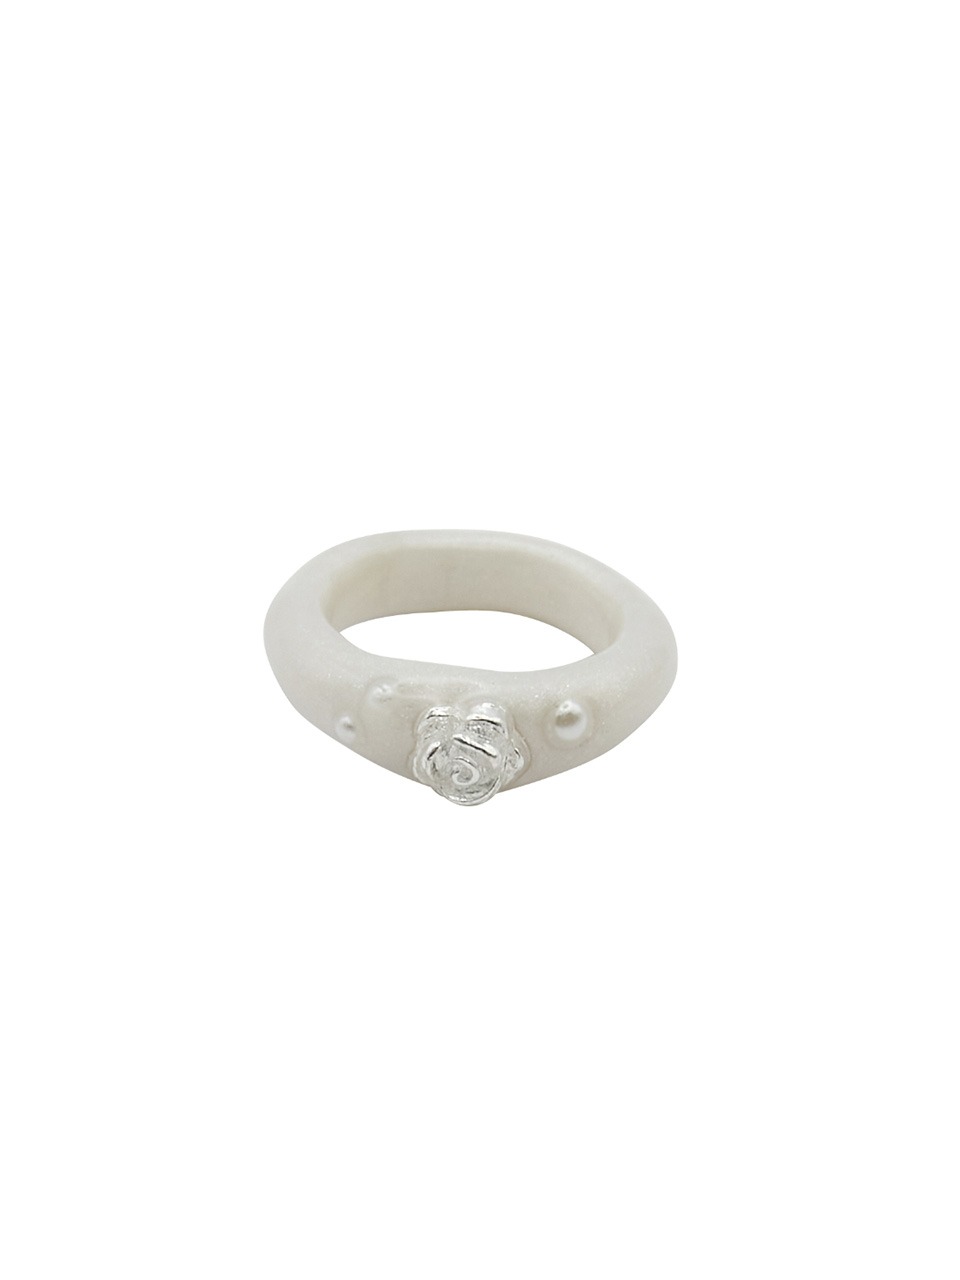 NFF - ROSE SOLITAIRE RING (WHITE)